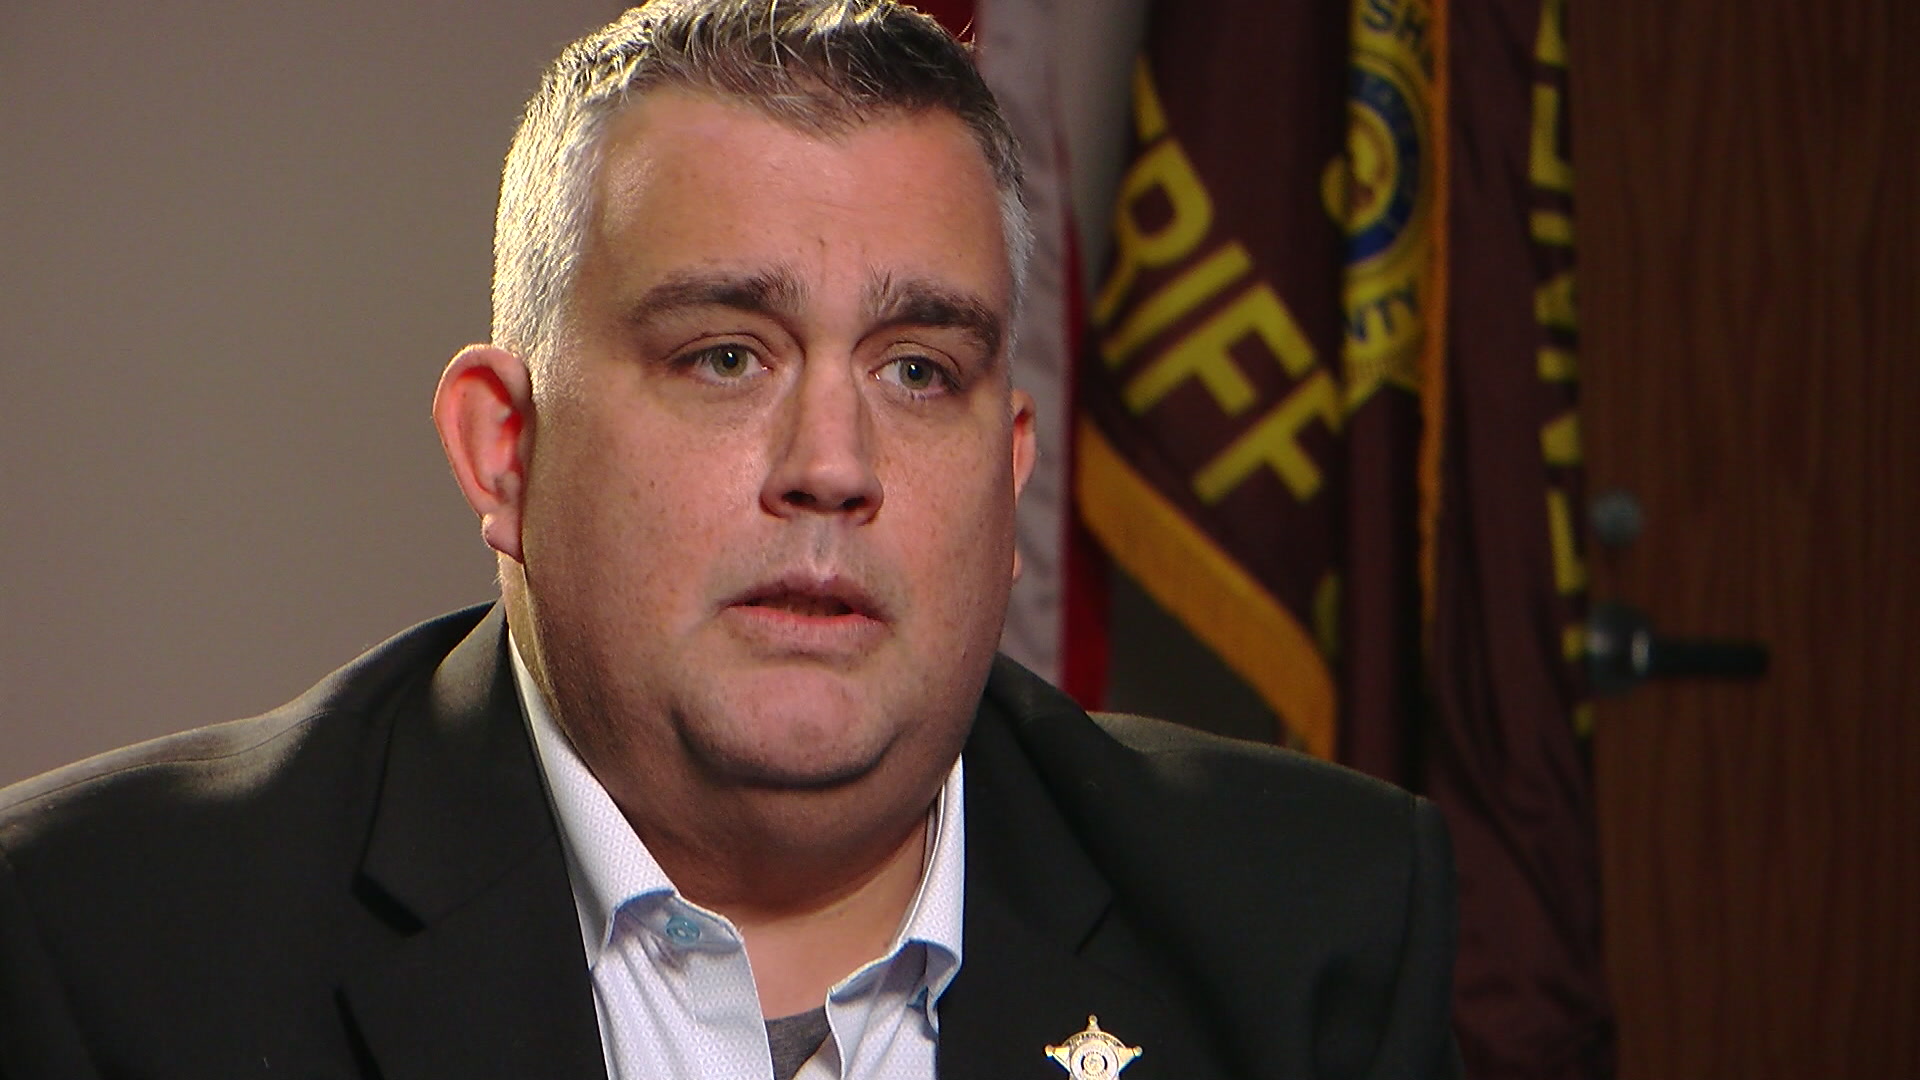 More Public Officials Call For Sheriff Hutchinson’s Resignation After DWI